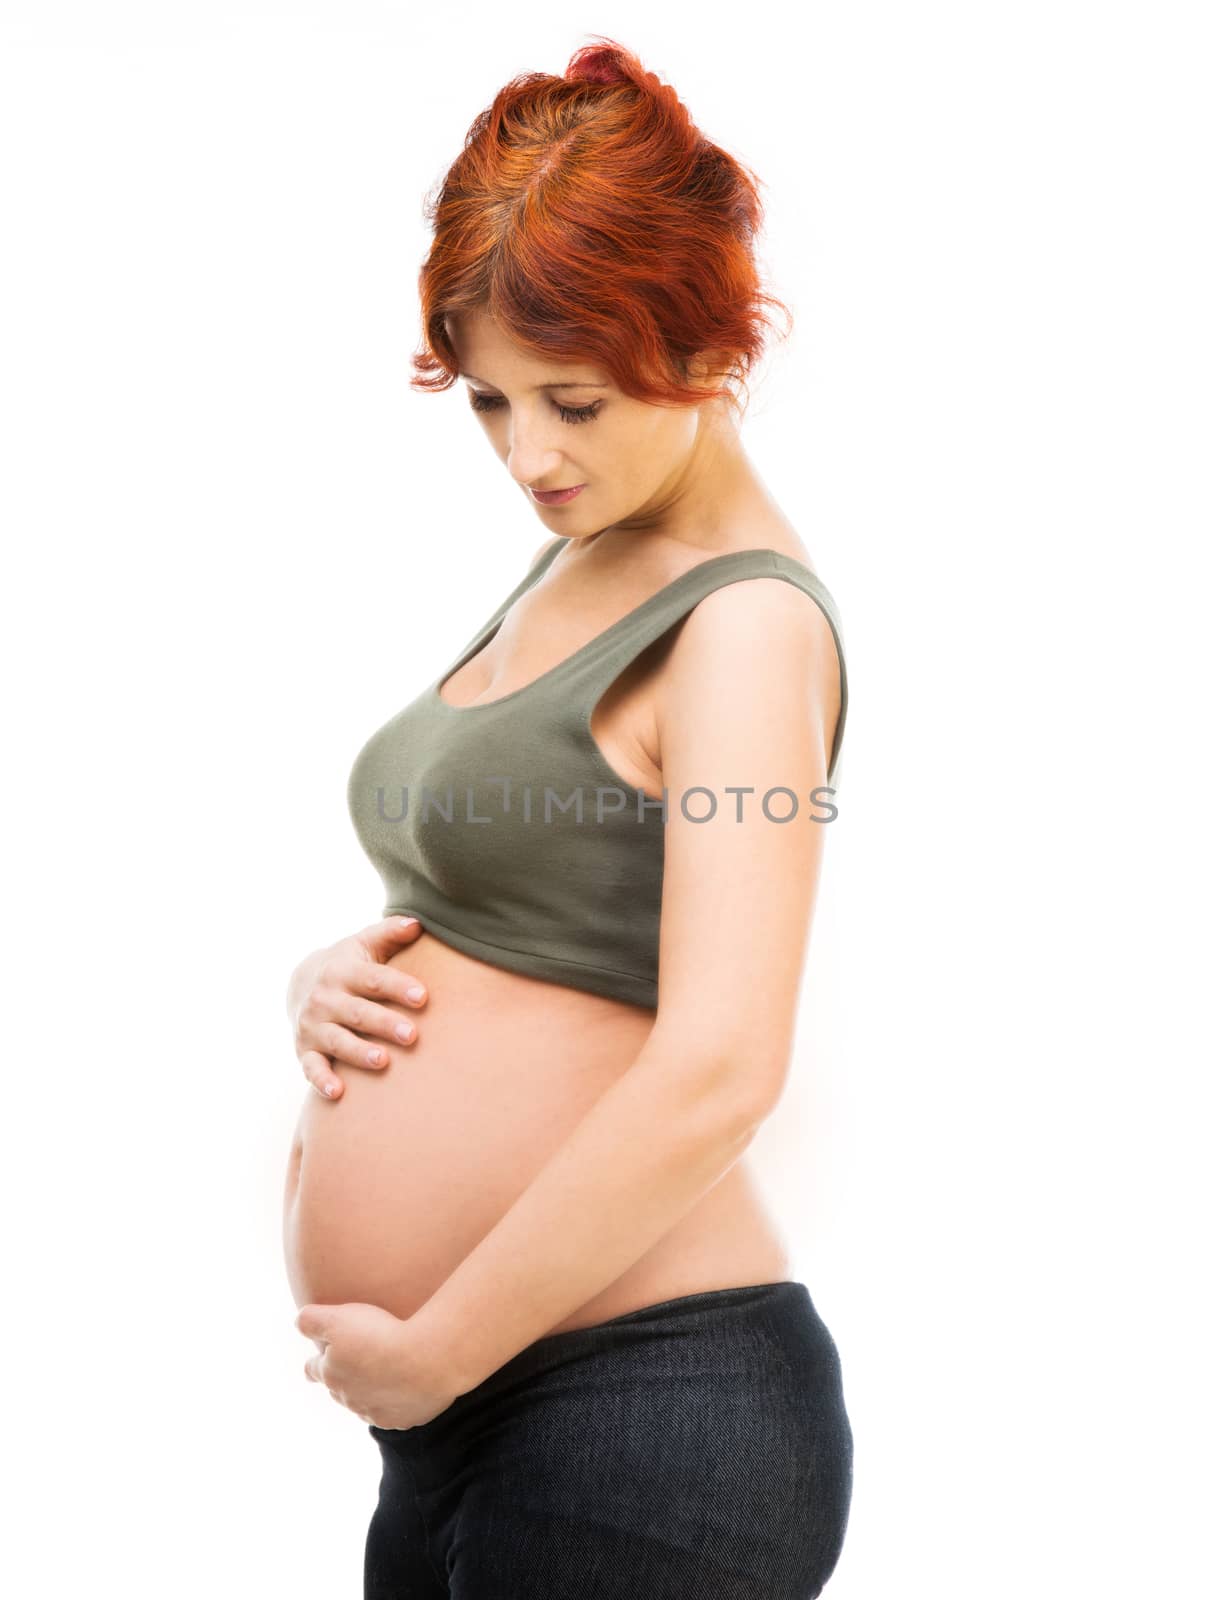 redhead pregnant woman isolated on white by GekaSkr